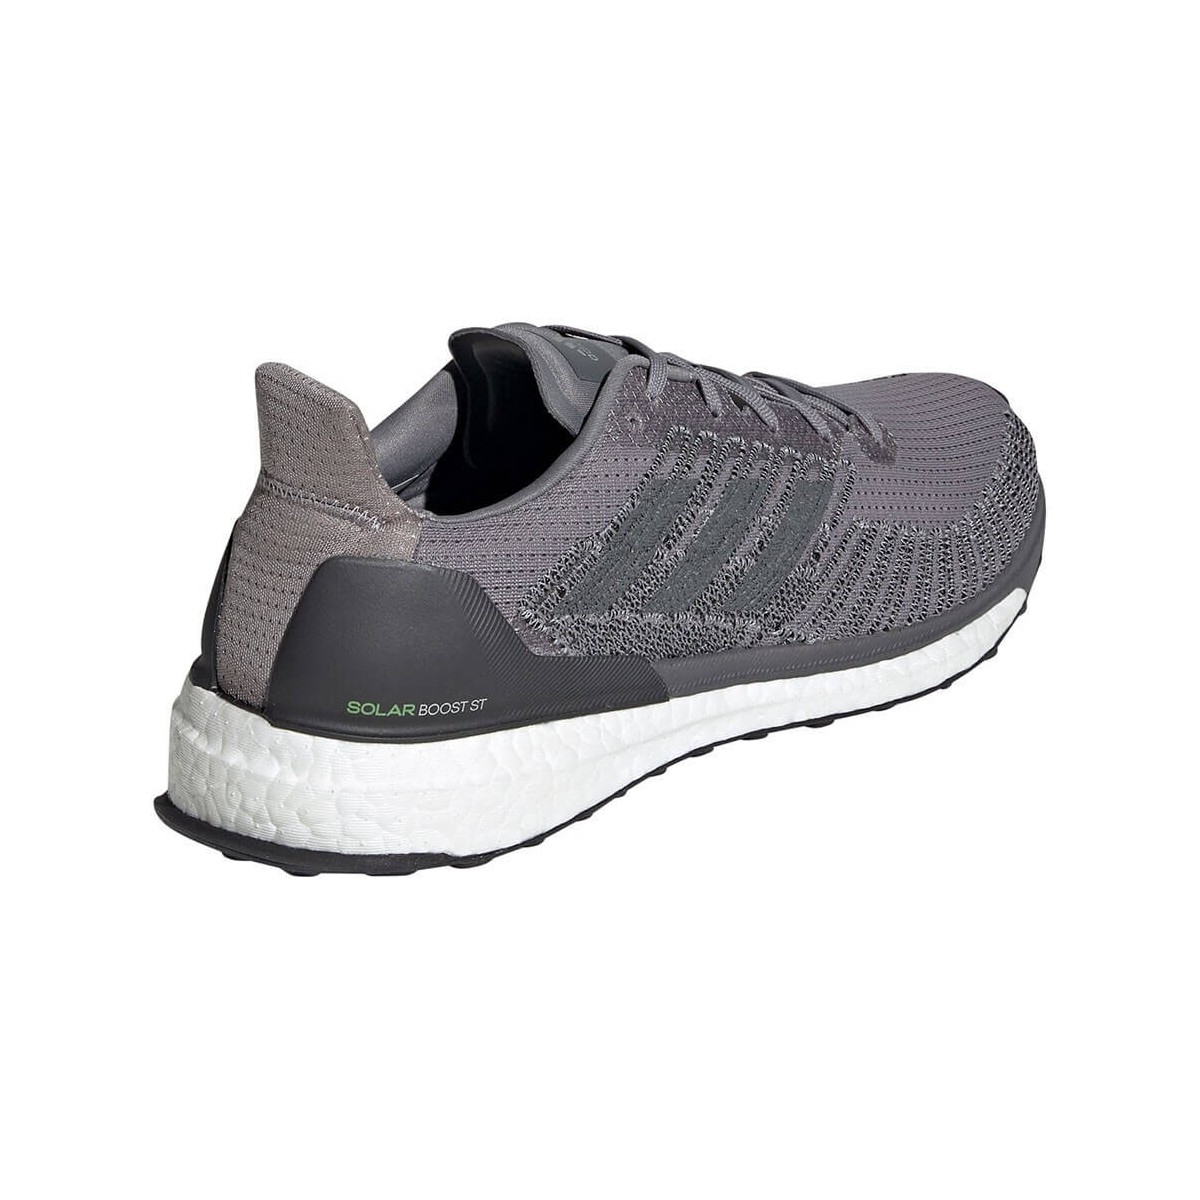 Adidas Solar Boost ST 19 Men's Running Shoes Grey AW19